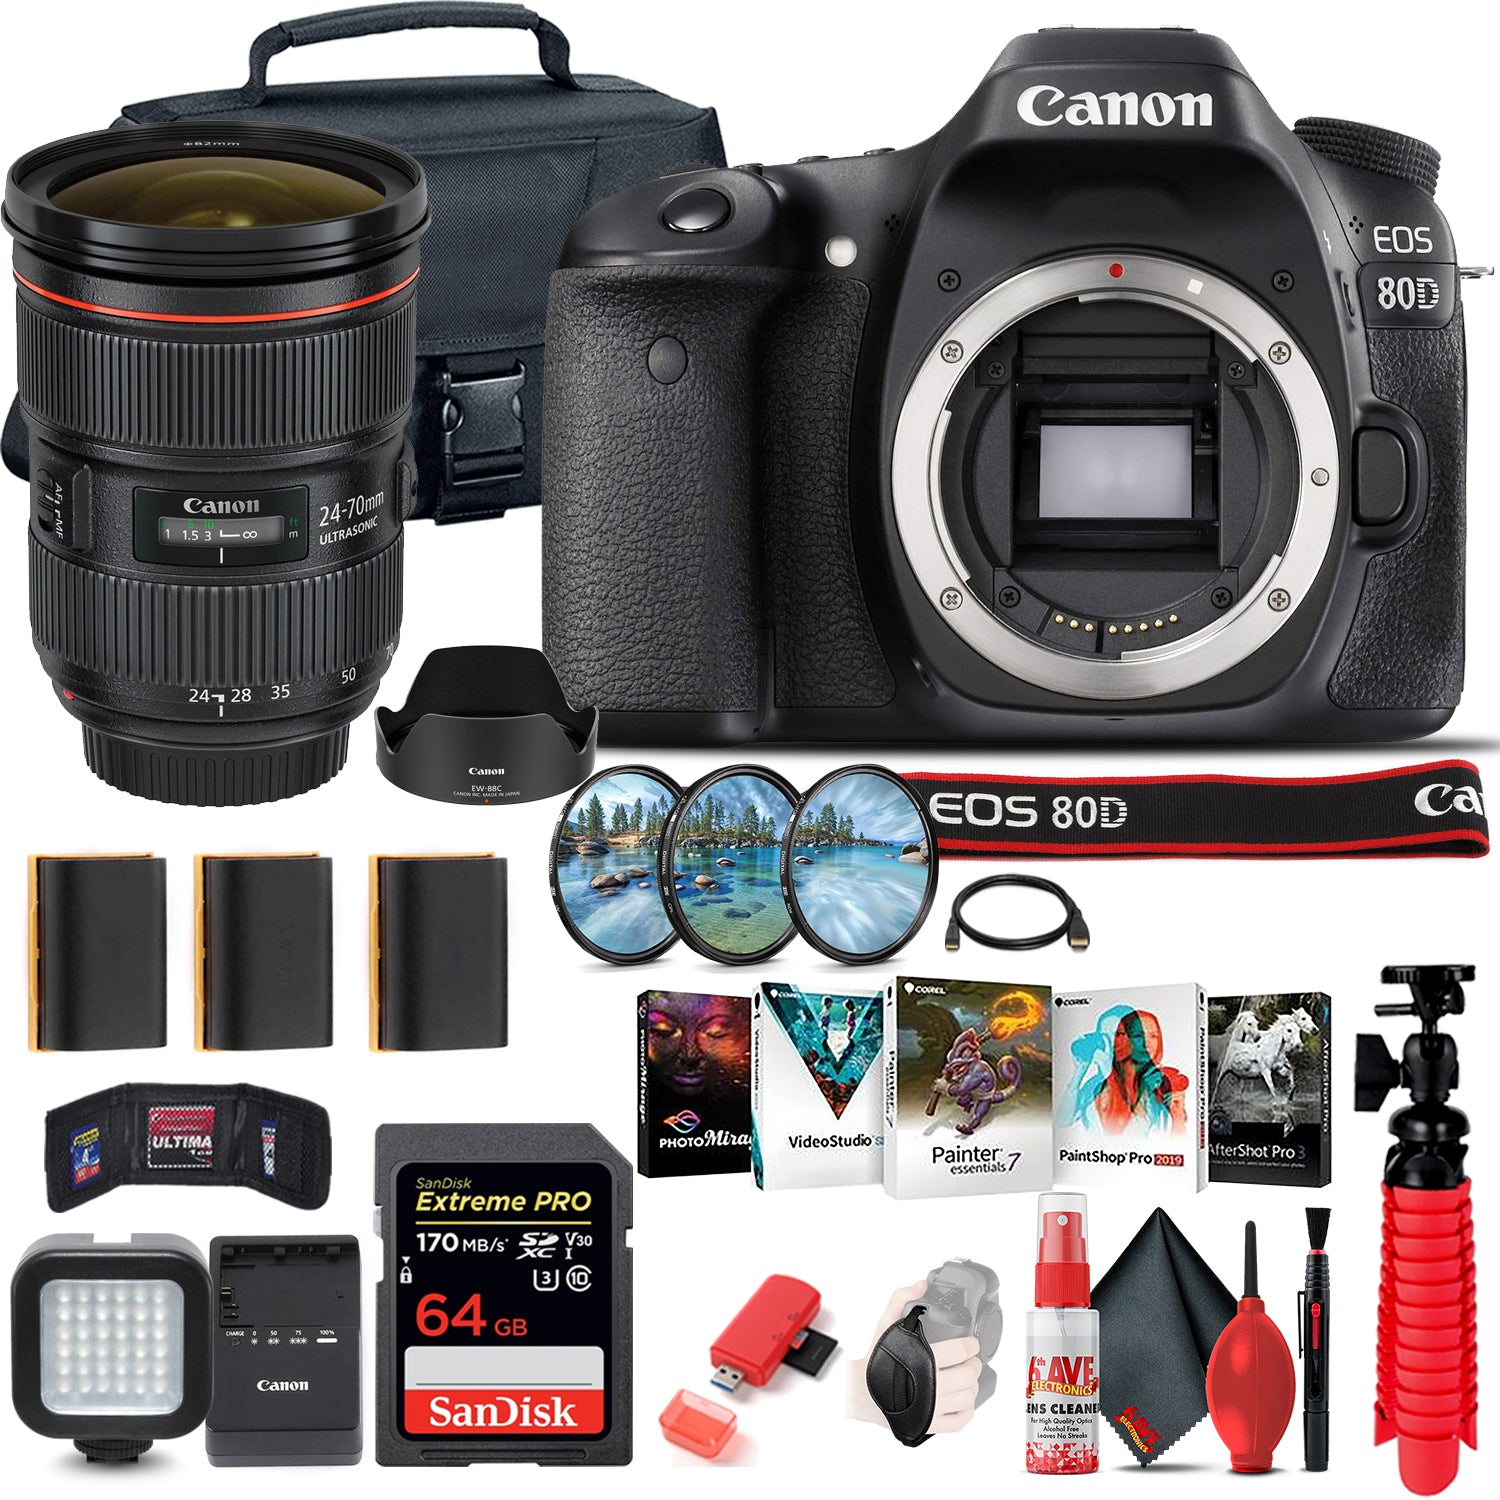 Canon EOS 80D DSLR Camera (Body Only) (1263C004) + Canon EF 24-70mm Lens + 64GB Ultimate Bundle